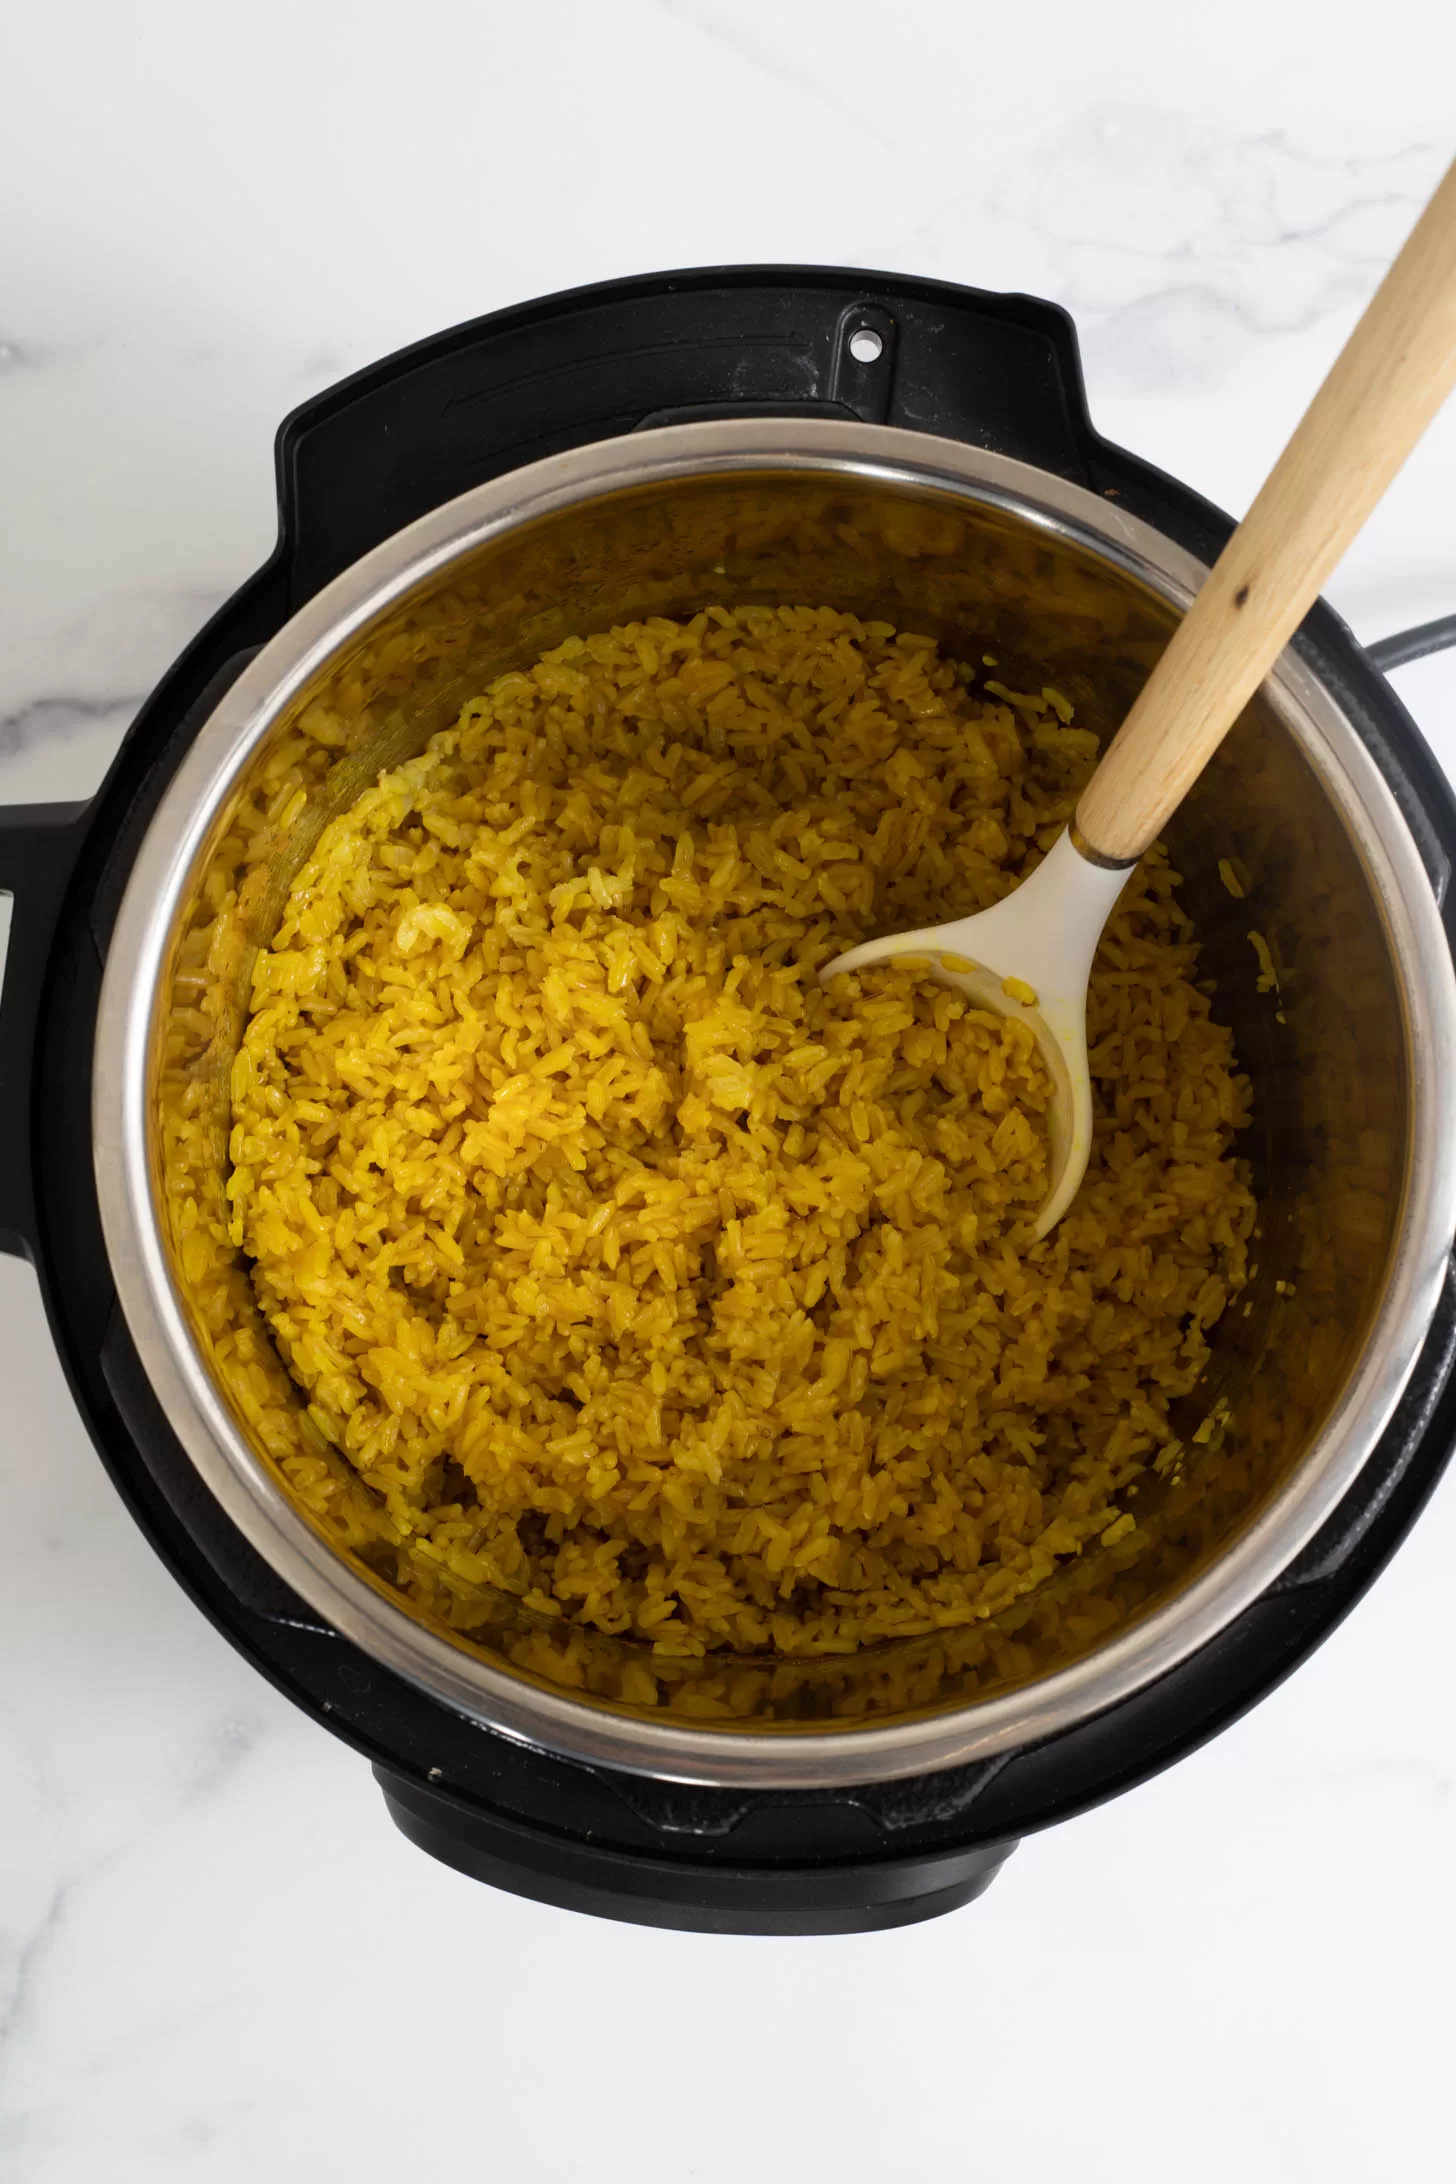 Turmeric Rice finished cooking in an Instant Pot.